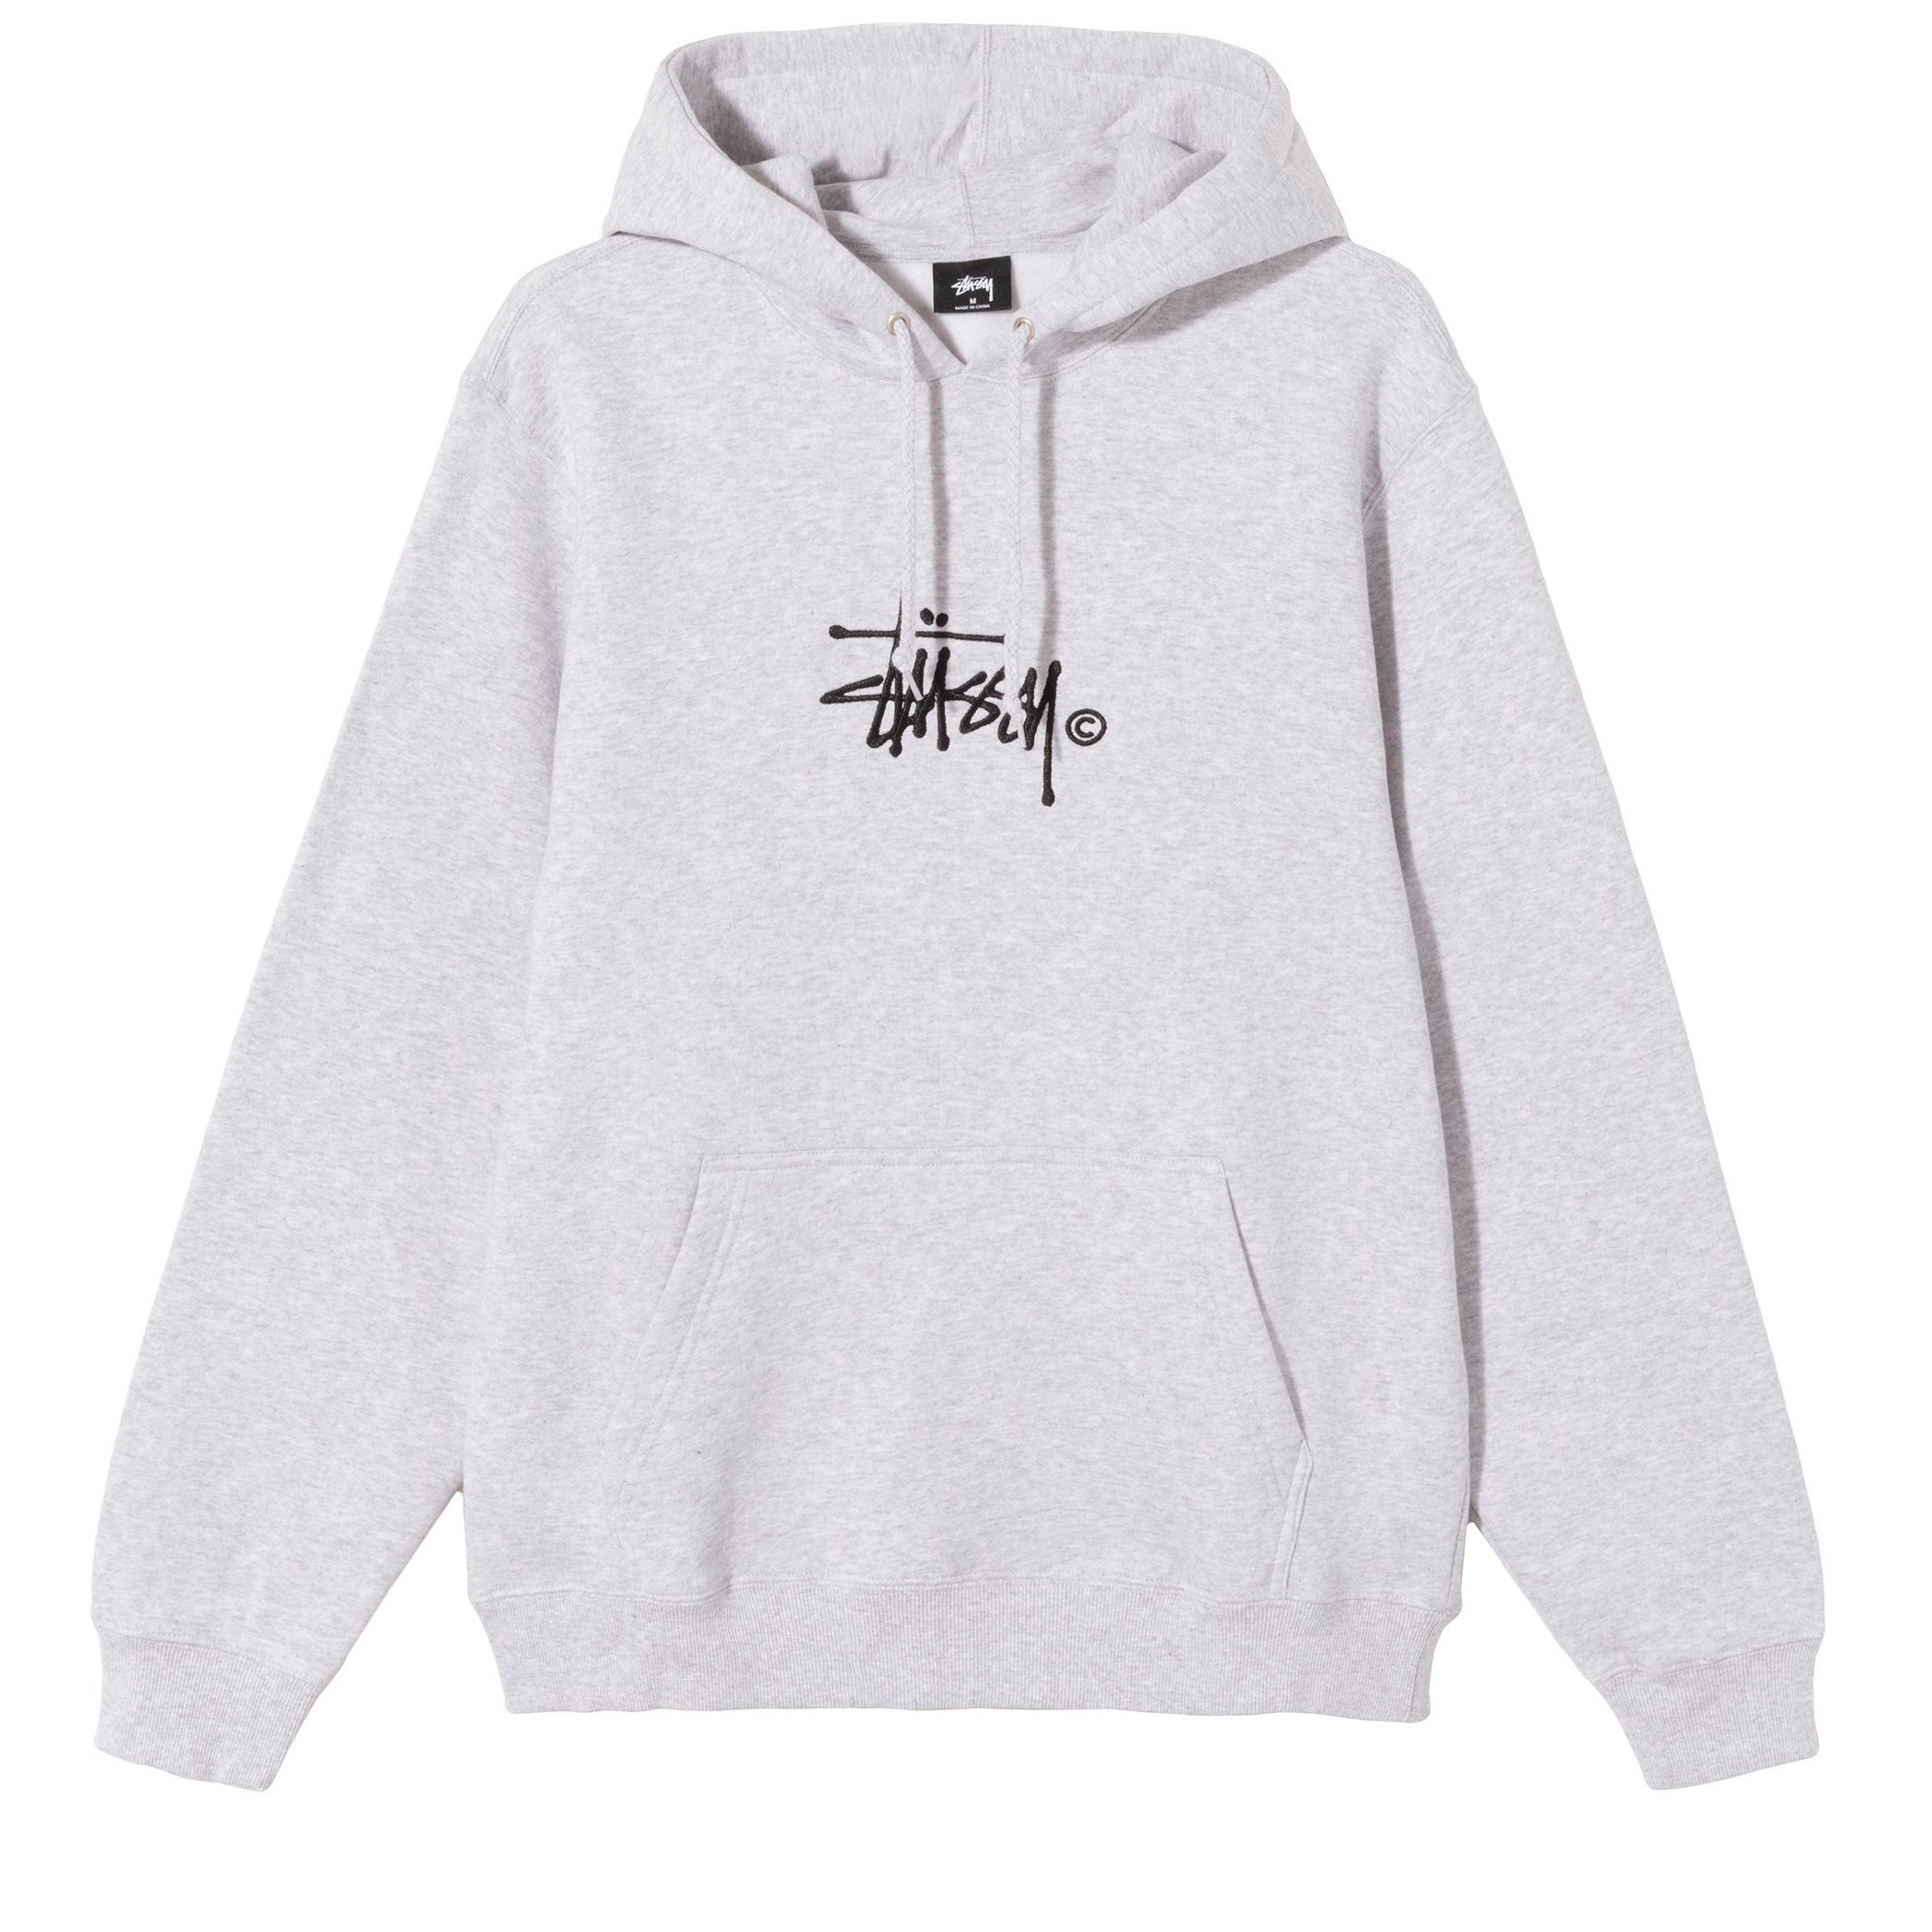 Download Stussy Copyright Stock Logo Applique Pullover Hooded ...